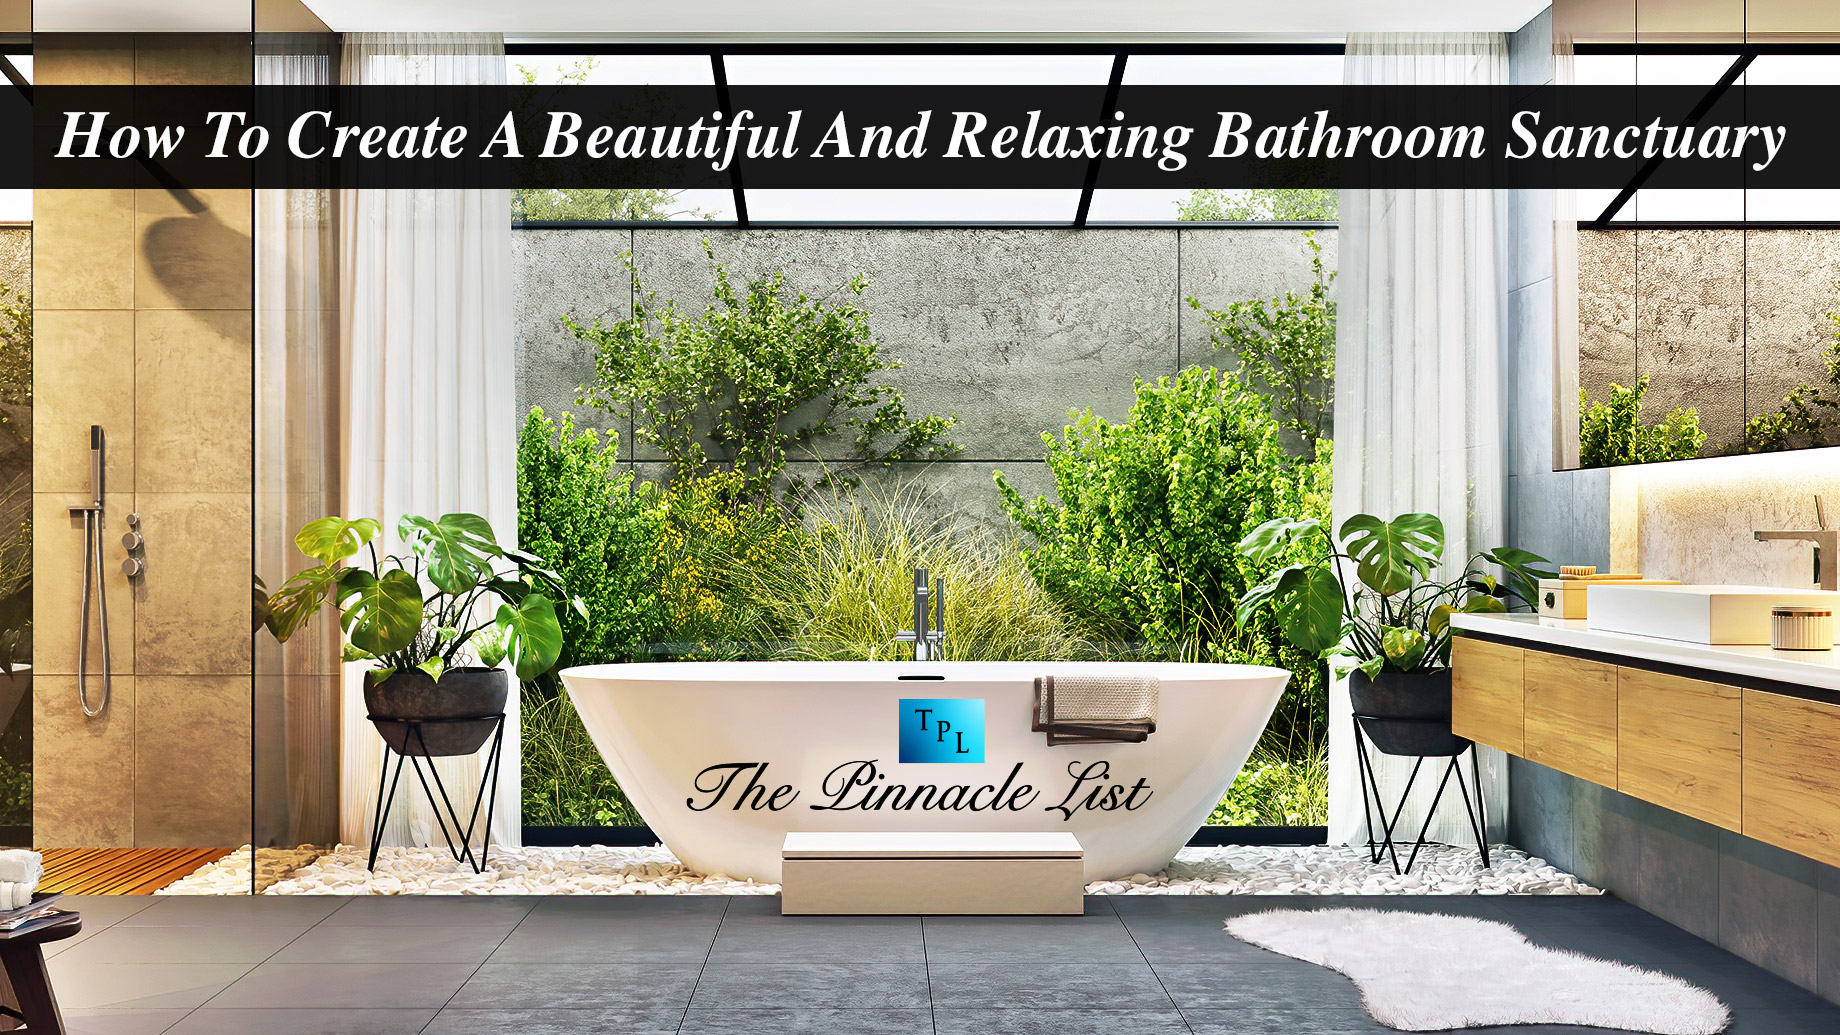 How To Create A Beautiful And Relaxing Bathroom Sanctuary